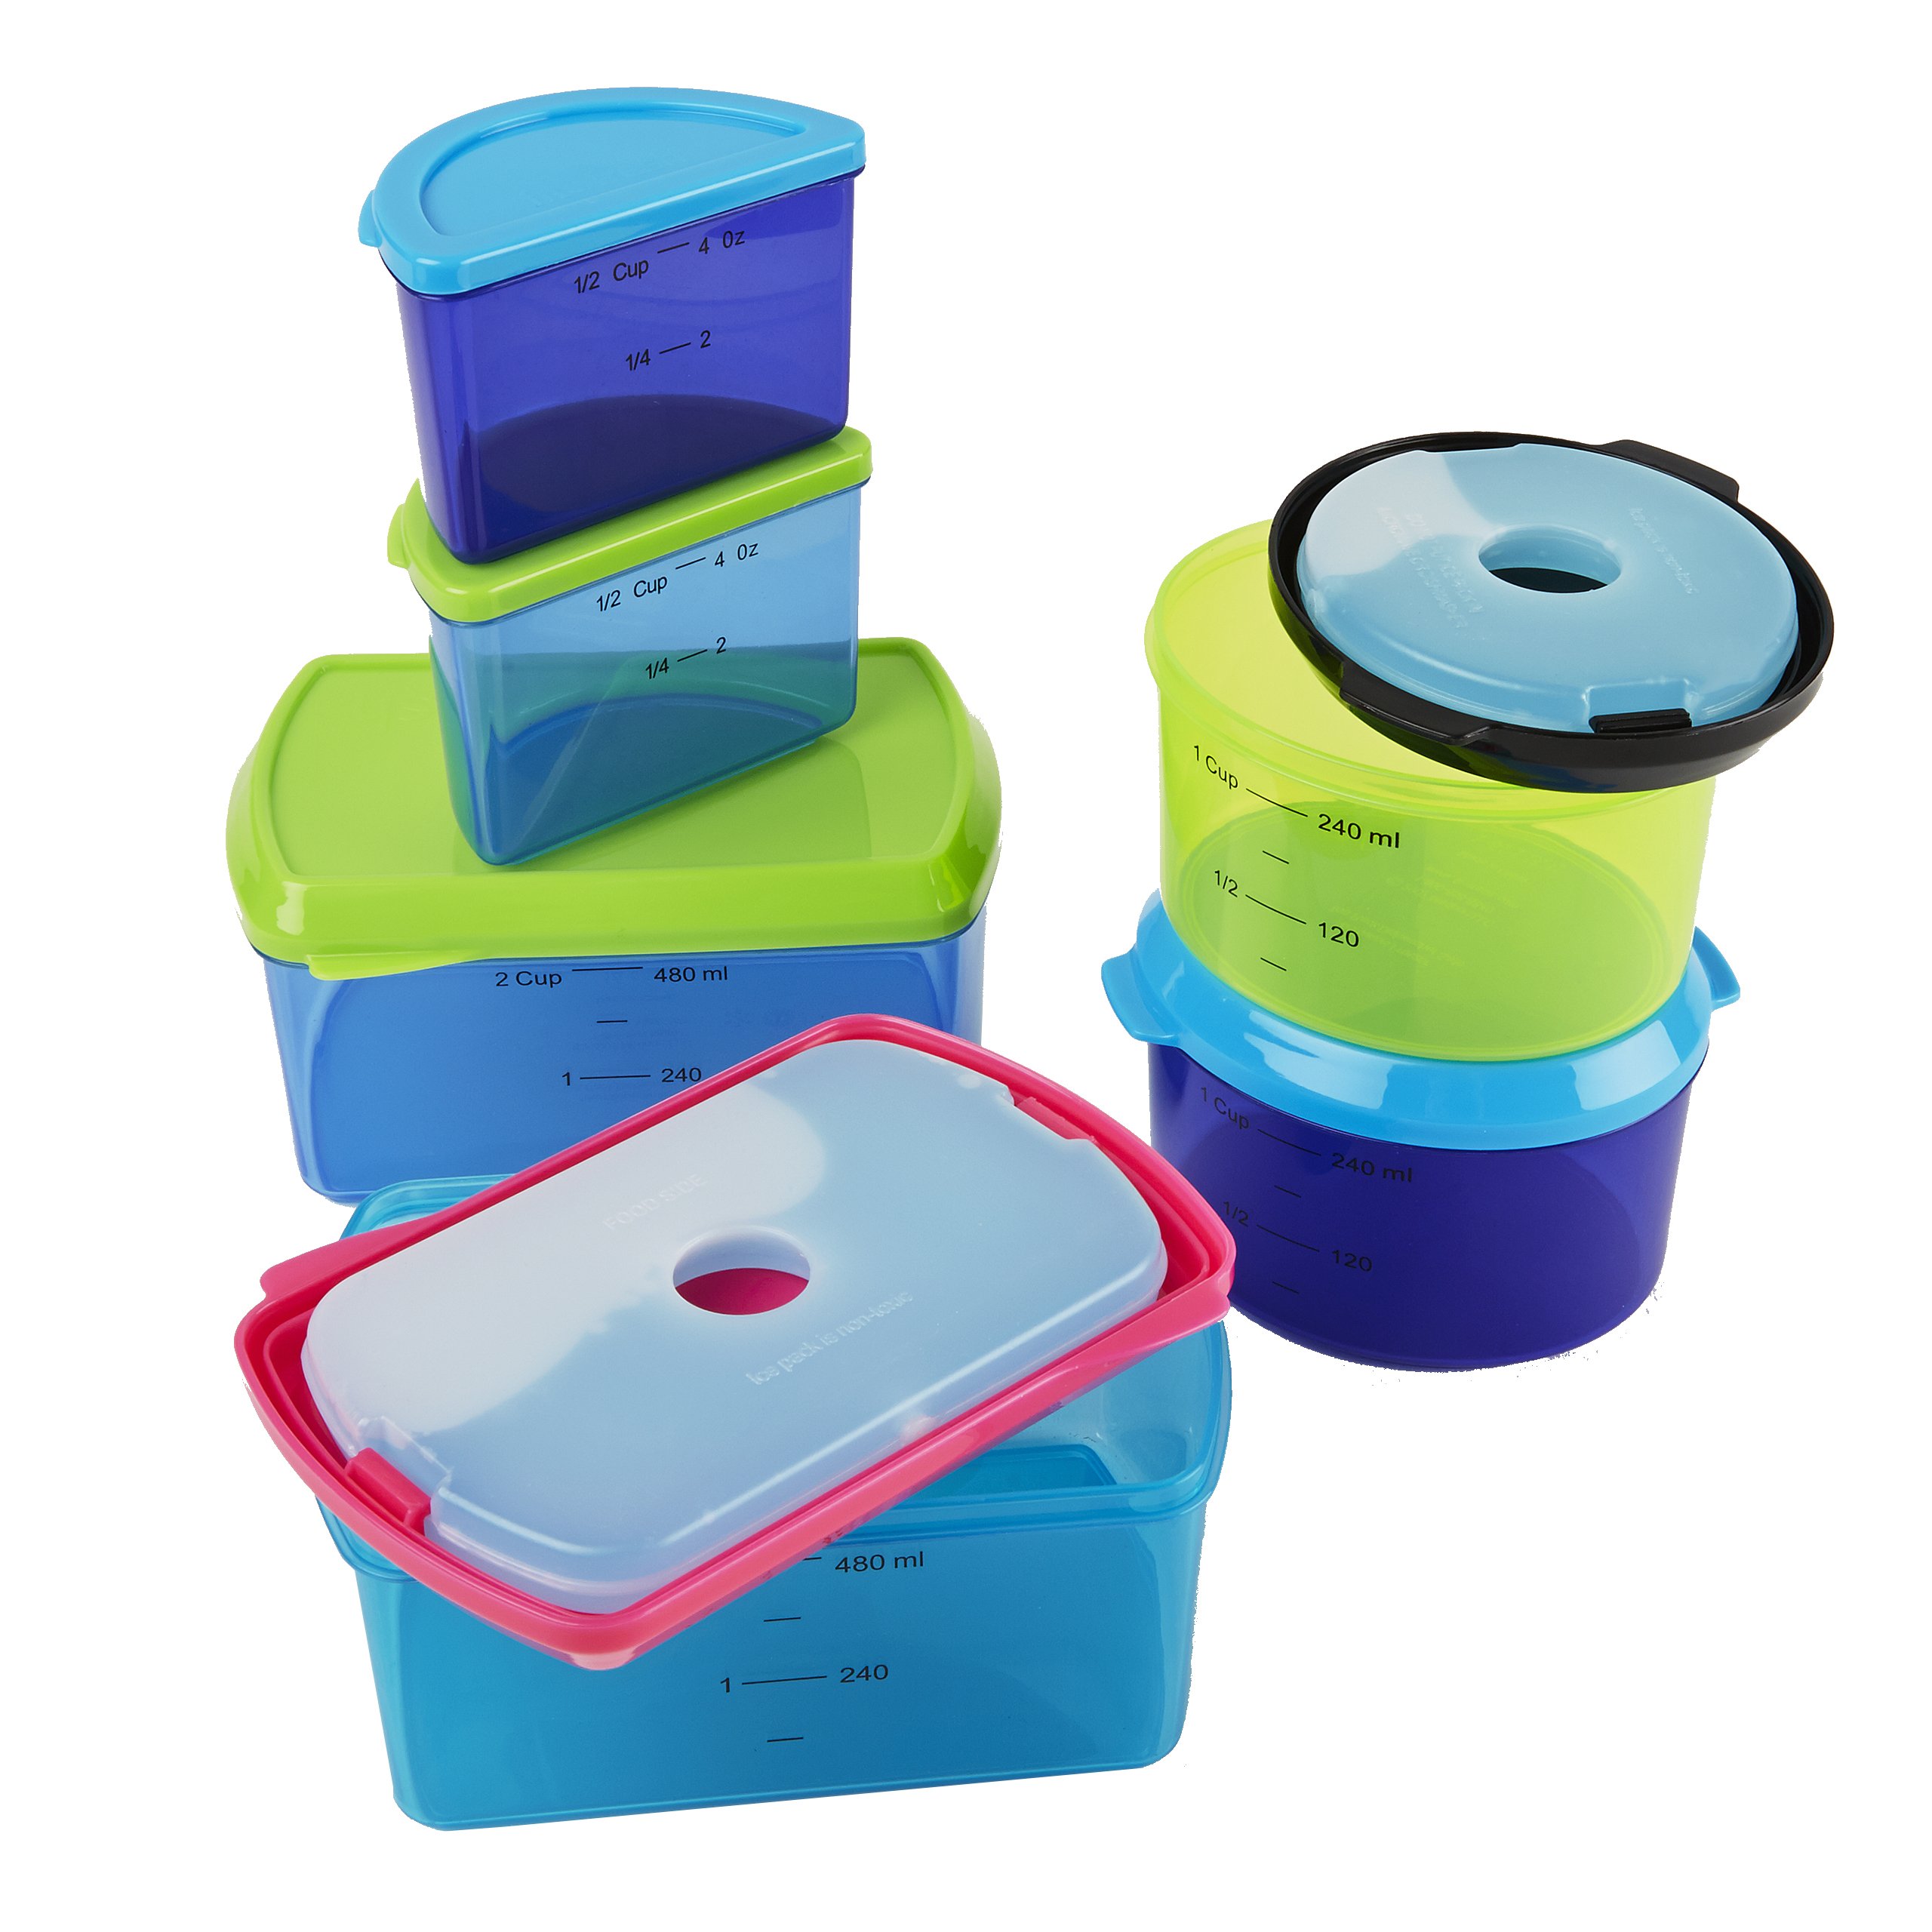 Microwave Safe Container Set Of 4